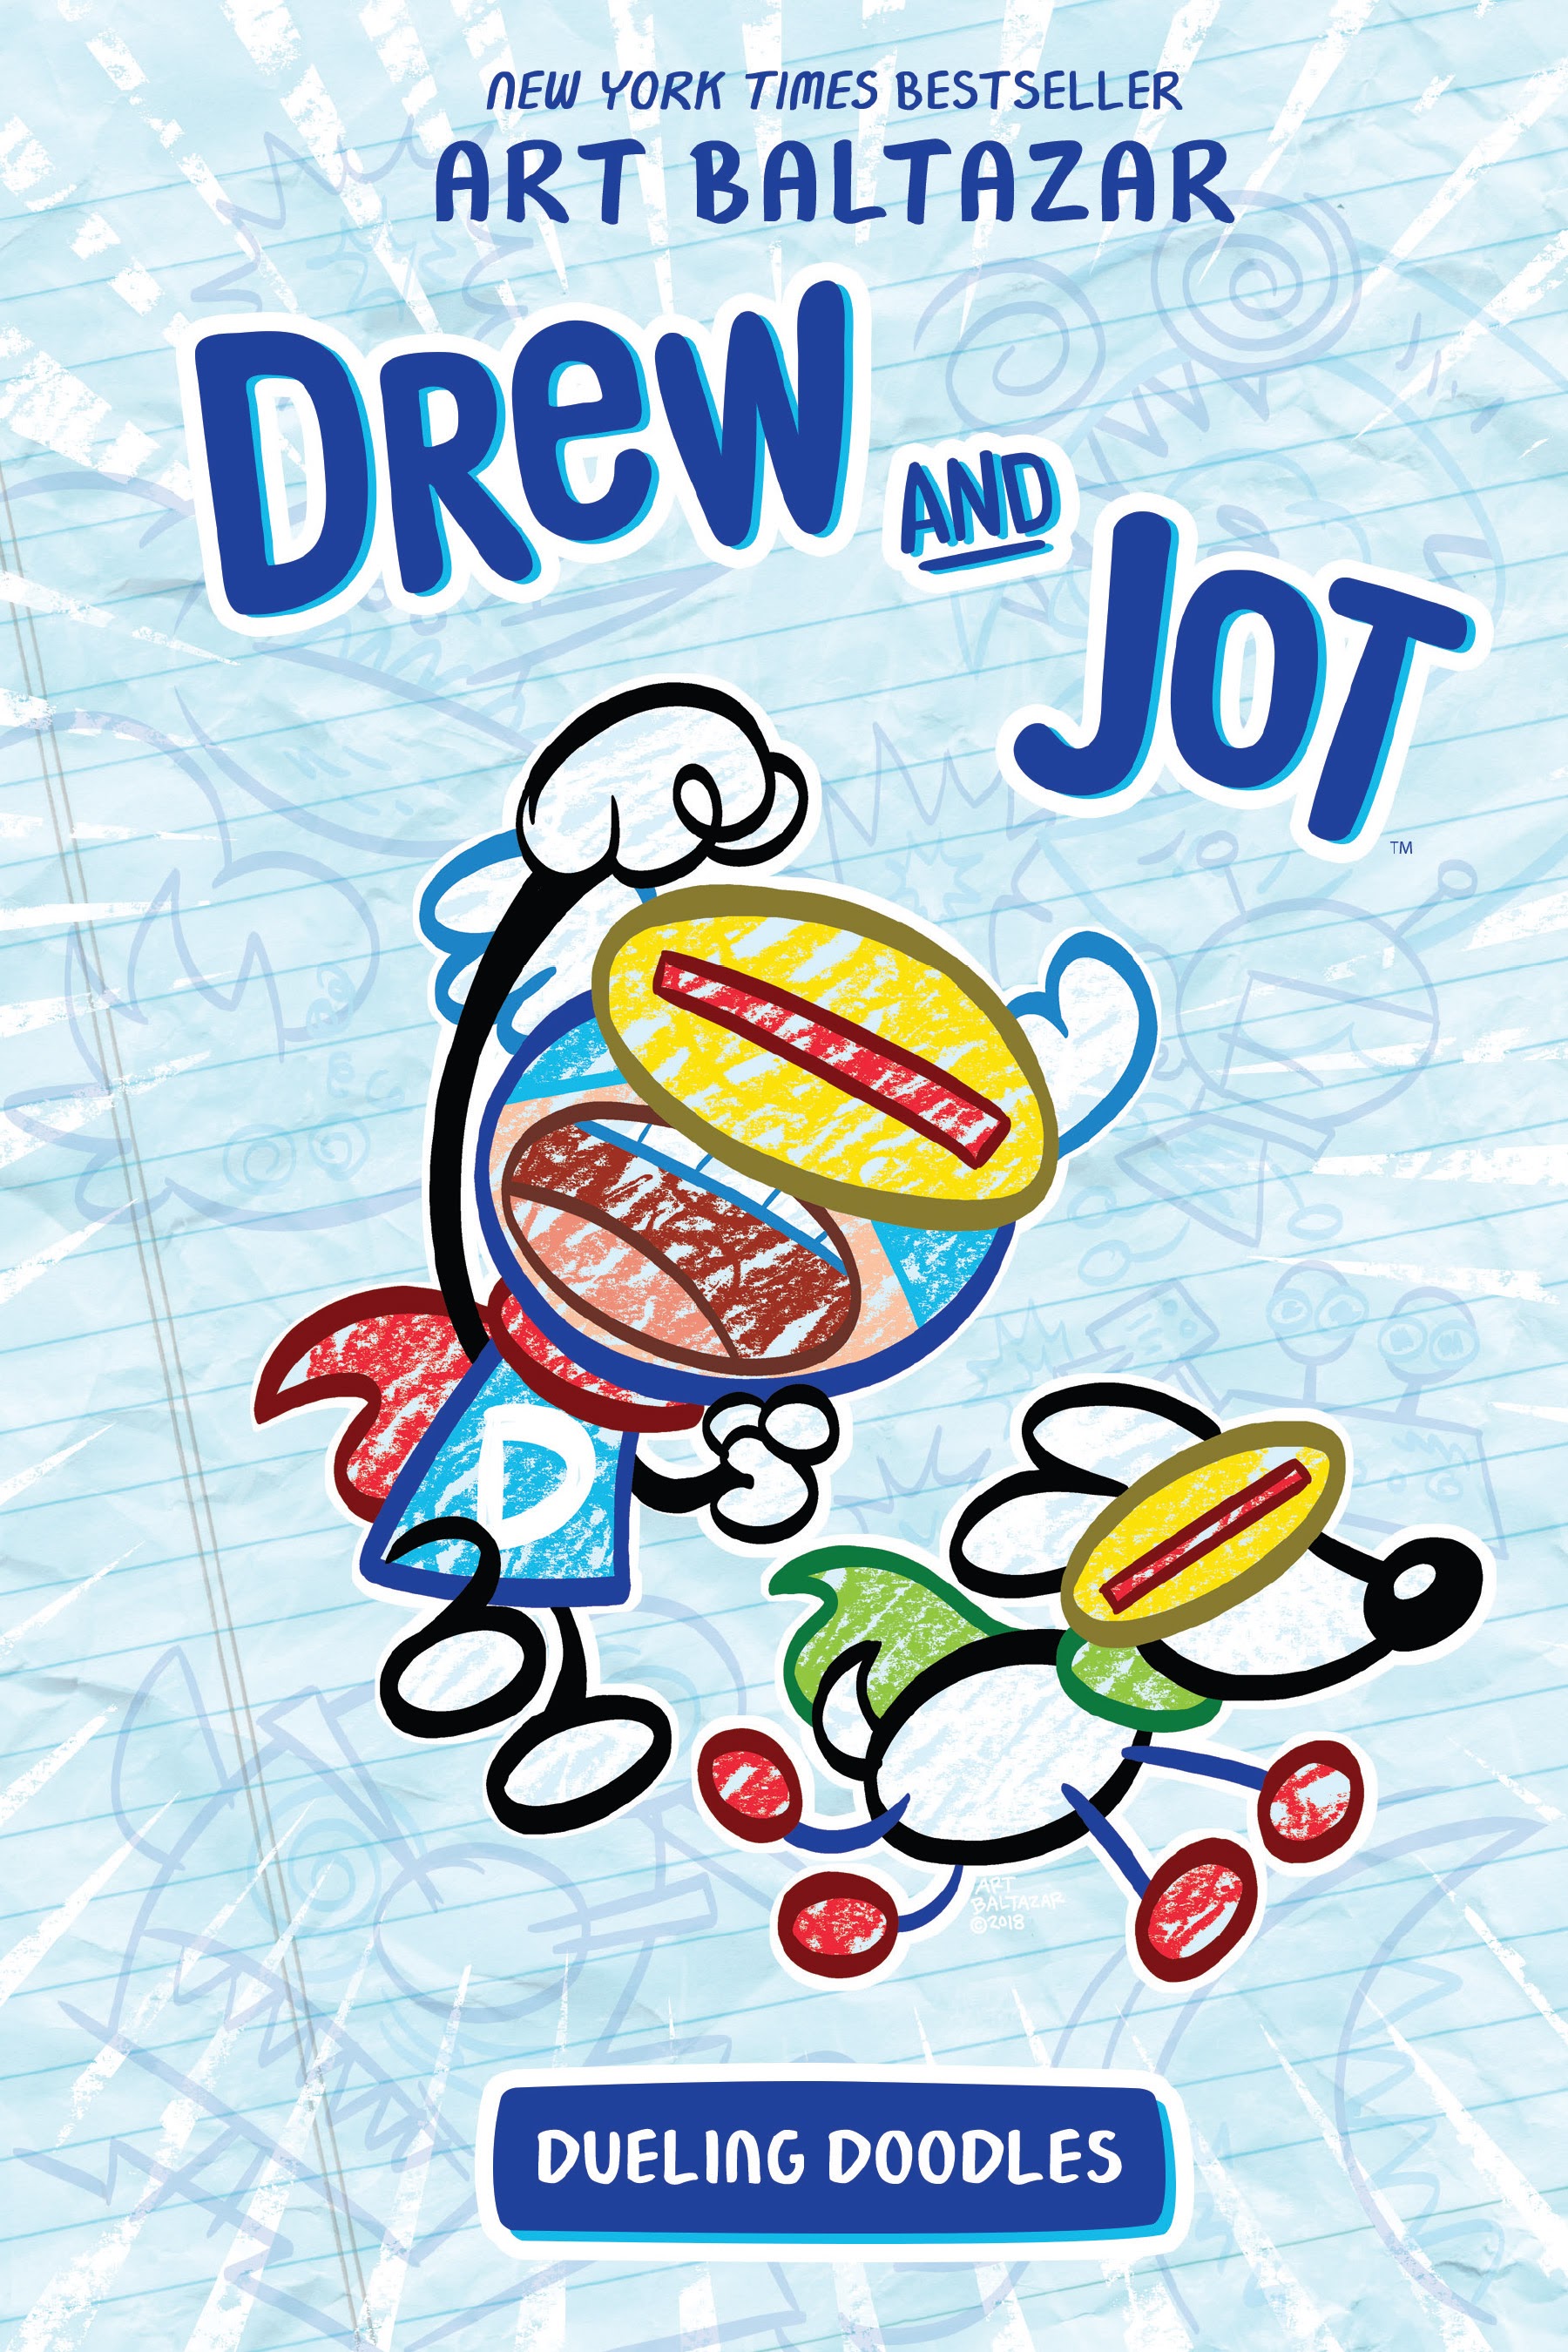 Read online Drew and Jot comic -  Issue # TPB (Part 1) - 1